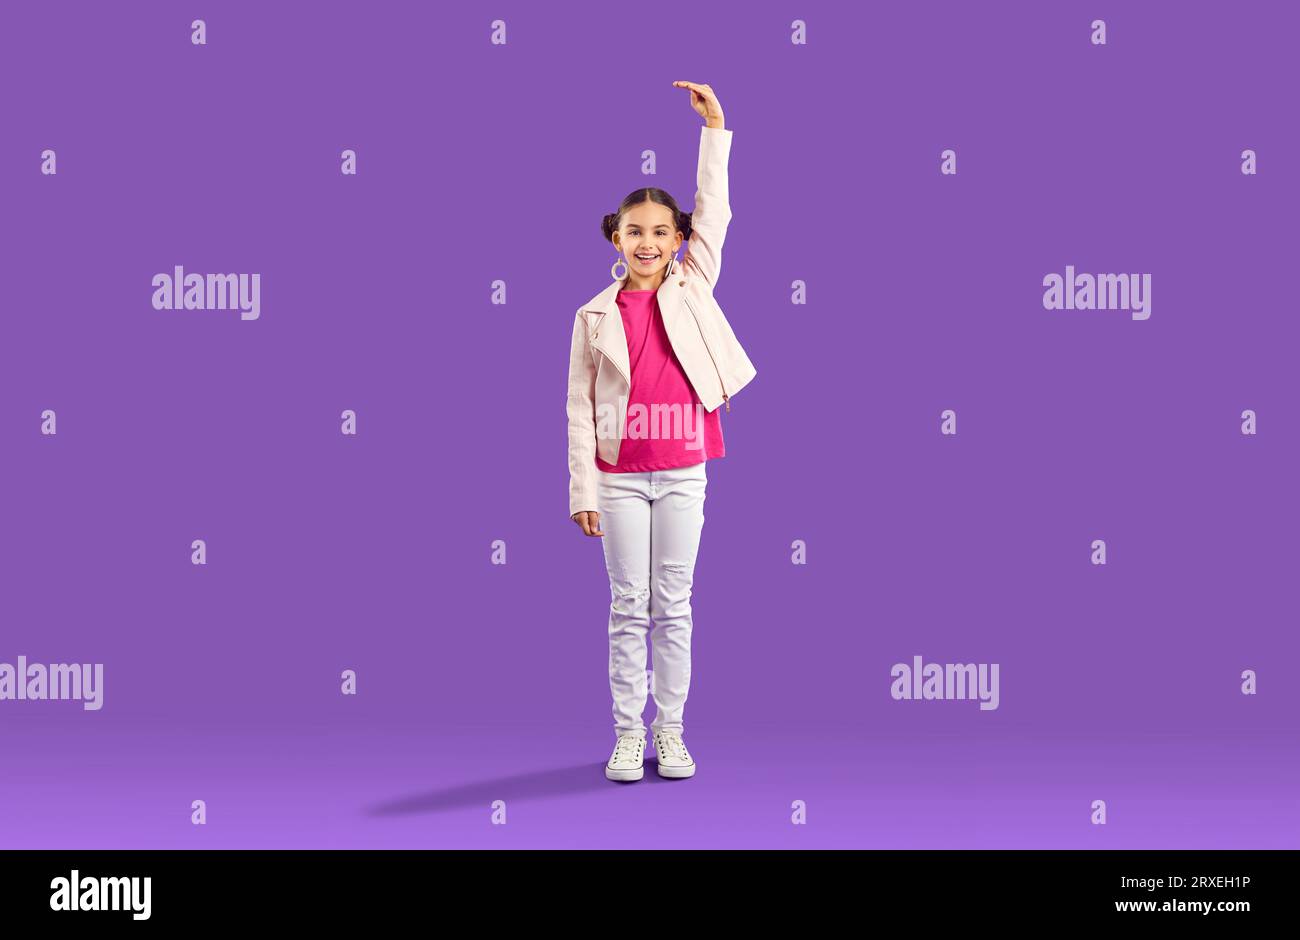 Funny little kid girl hold hand above head showing how to increase her height on purple background. Stock Photo